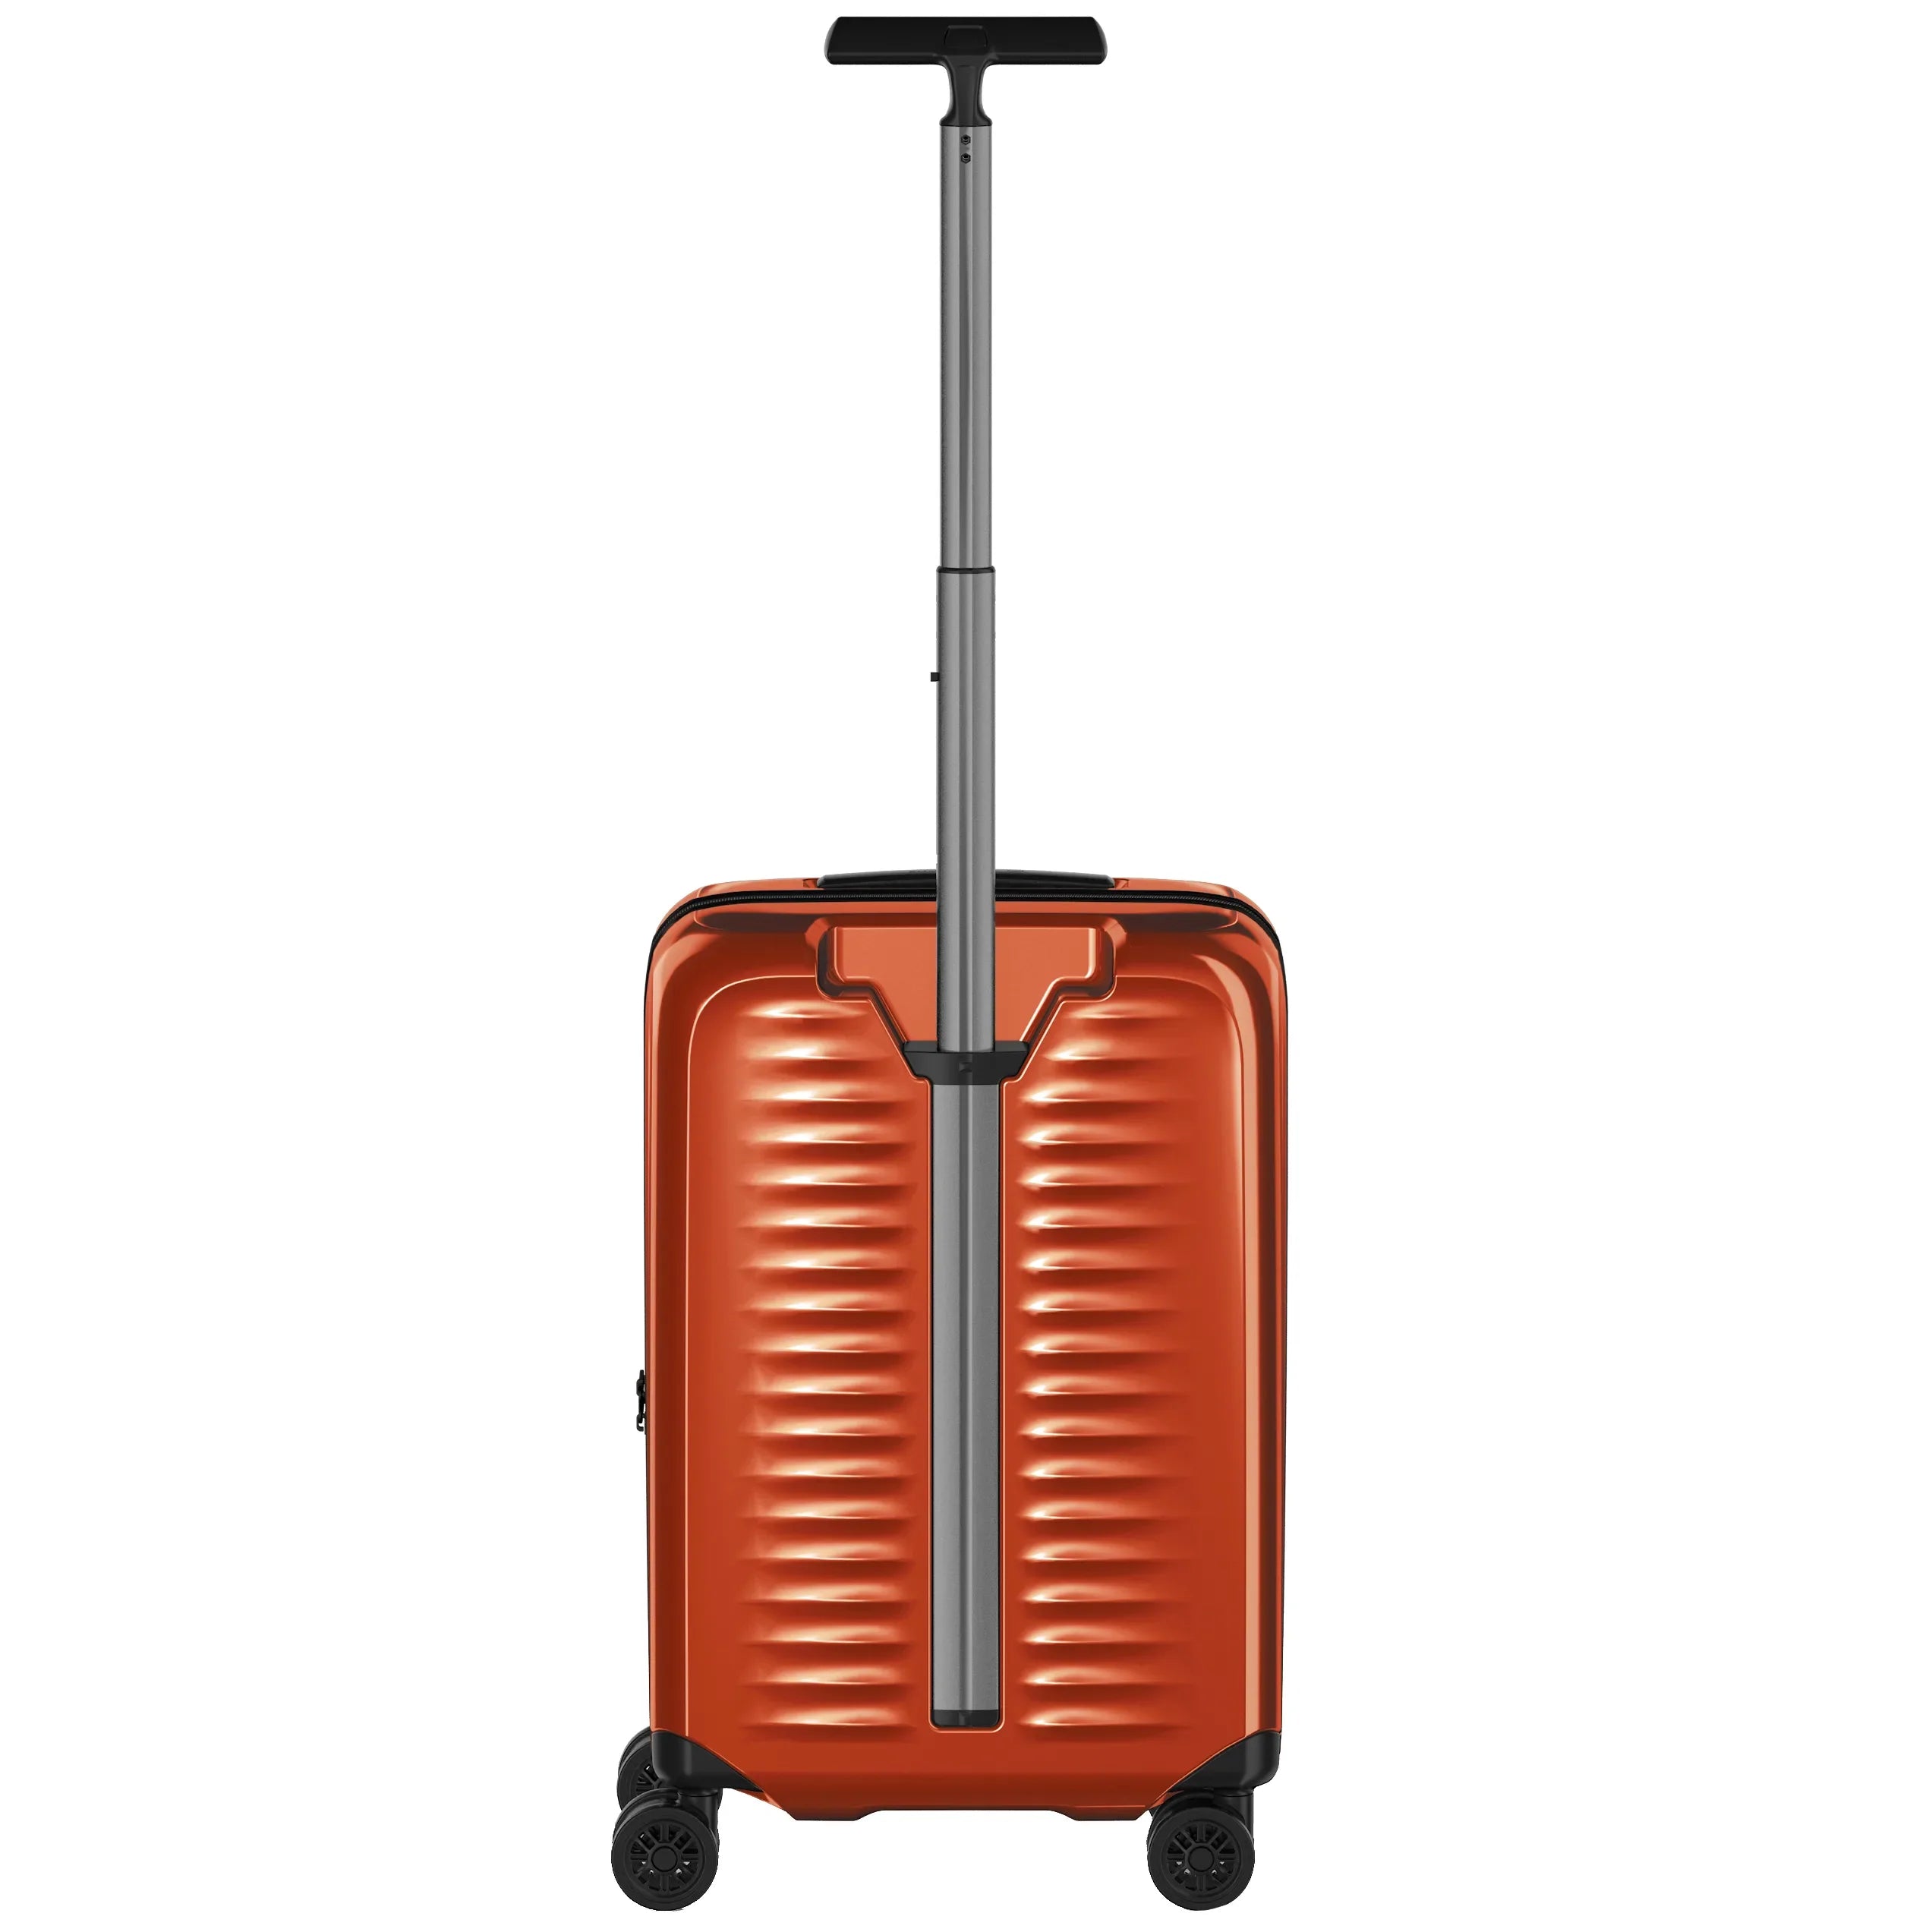 Victorinox Airox Frequent Flyer Hardside Carry-On 55 cm - Silver